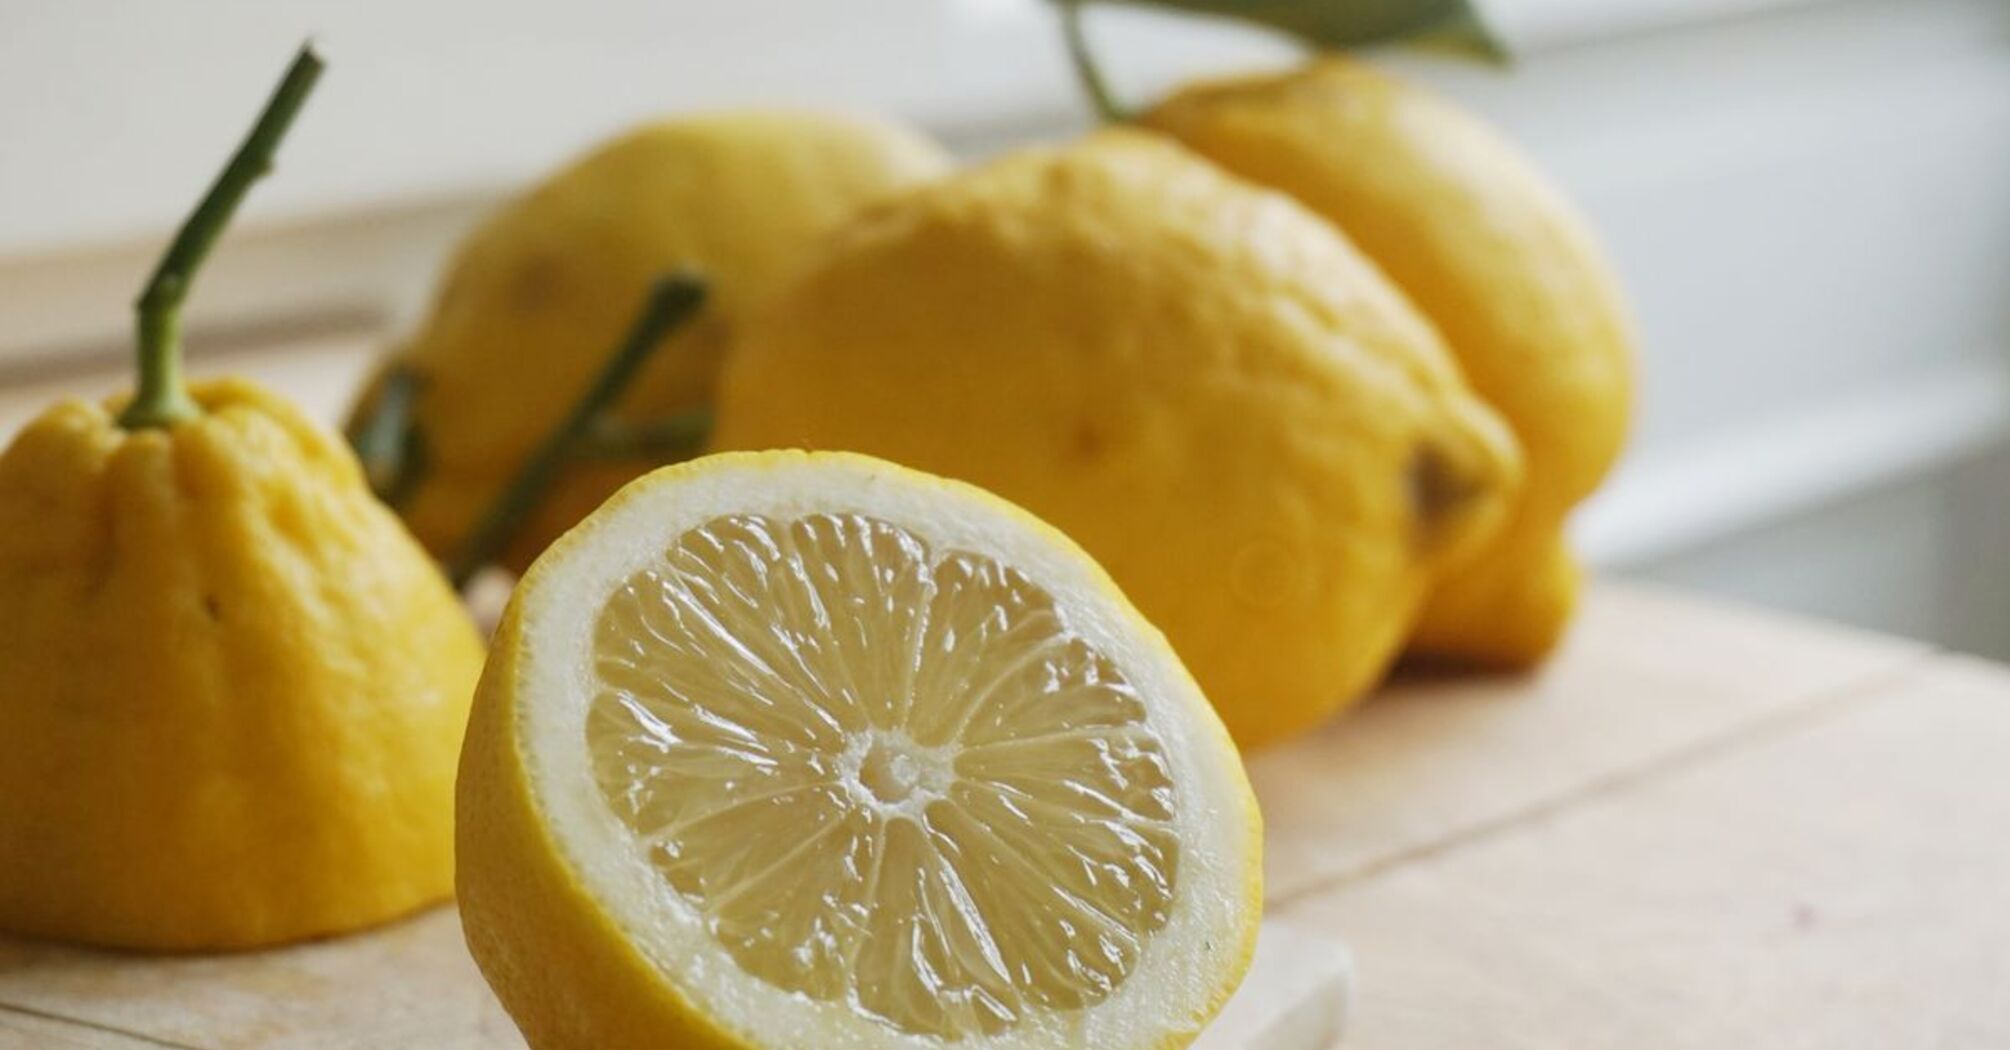 How to use lemon in the kitchen